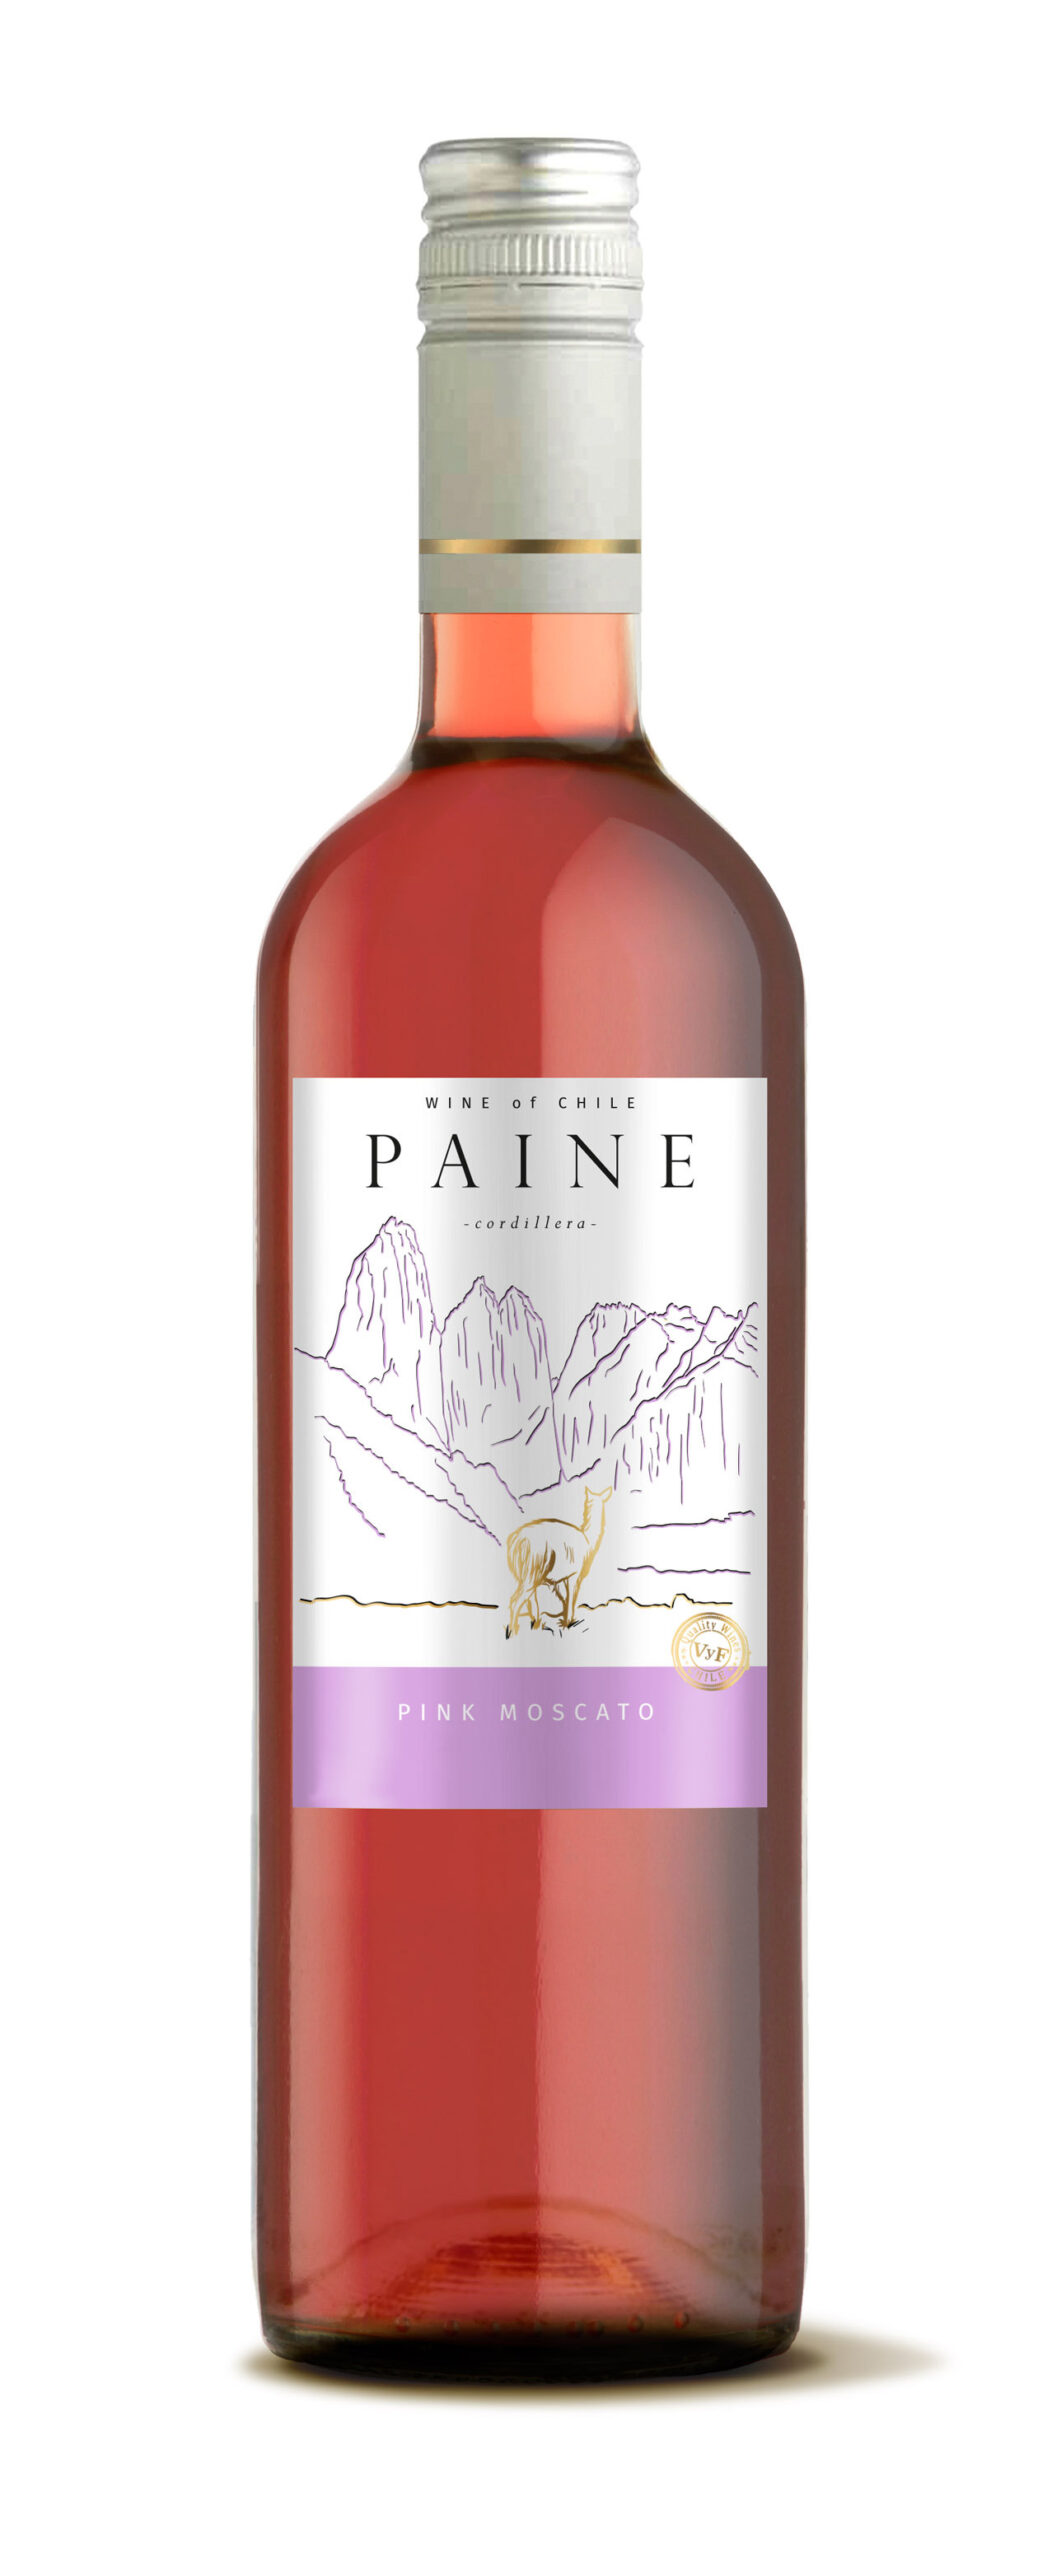 vyf-paine-pink-moscato